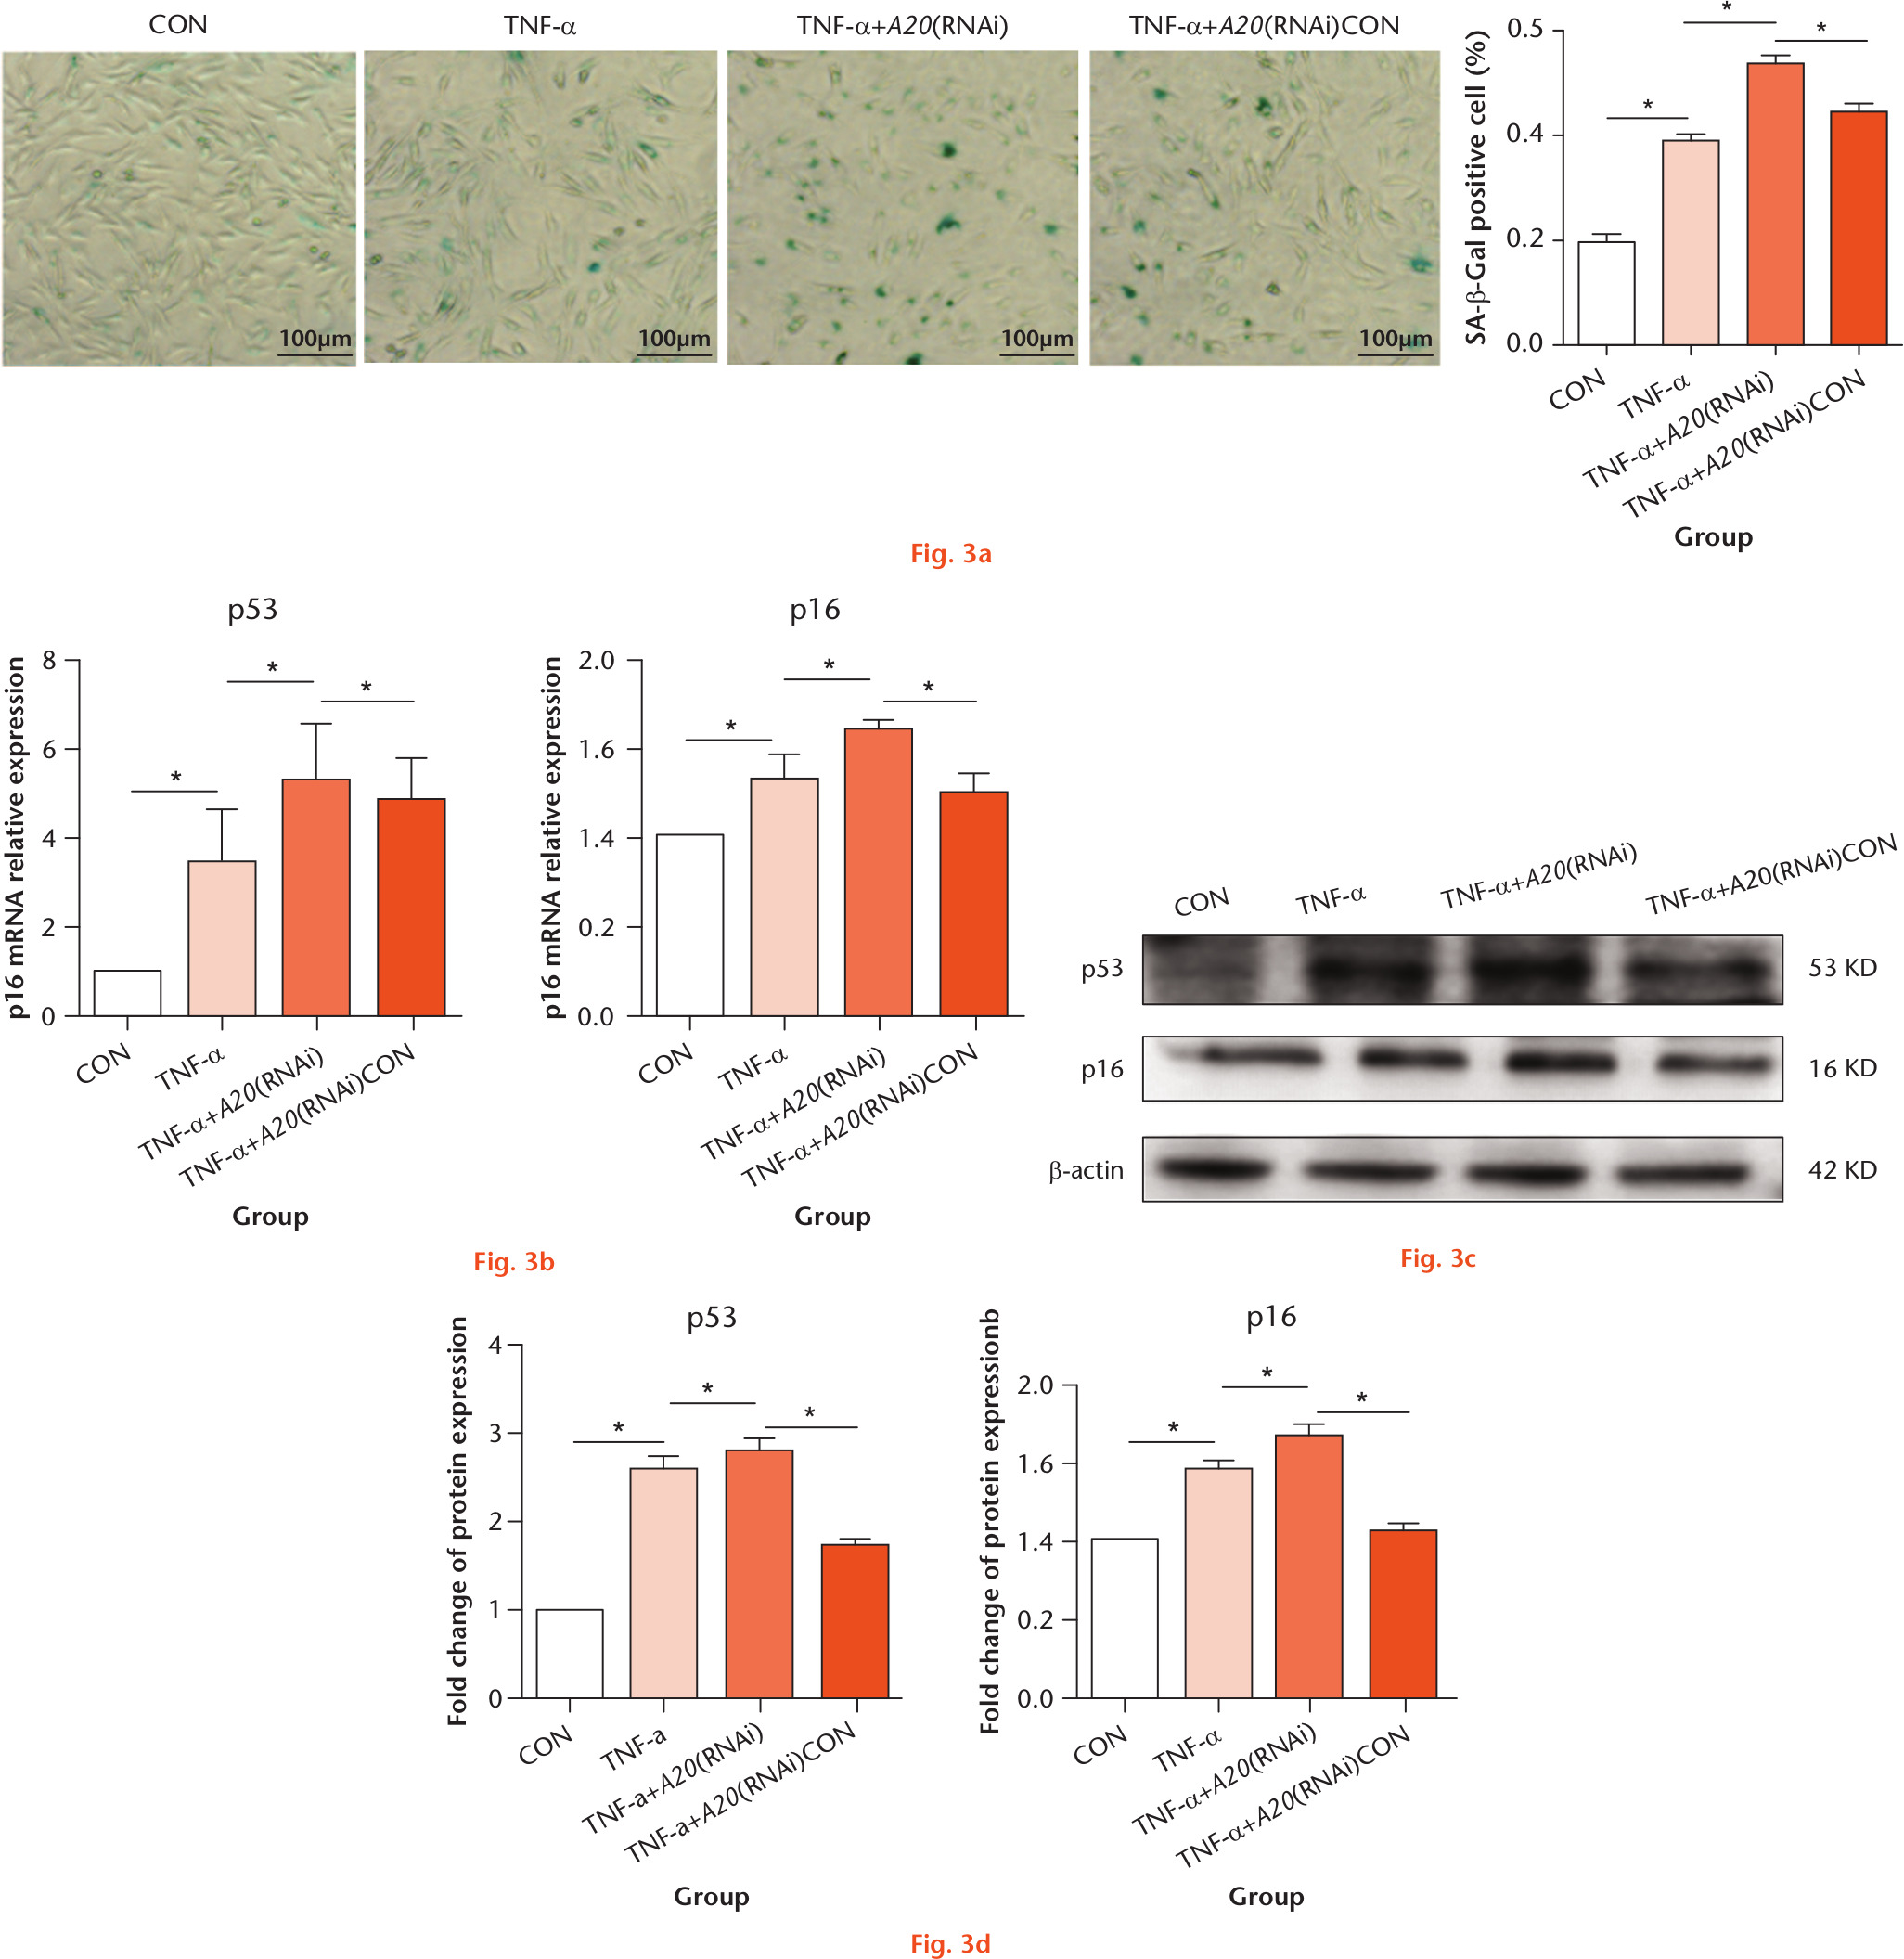 Fig. 3 
            Downregulation of A20 expression increased senescence of tumour necrosis factor alpha (TNF-α)-treated nucleus pulposus cells (NPCs). a) The positive ratio of senescence-associated beta-galactosidase (SA-β-Gal) staining is increased in TNF-α-treated NPCs with downregulated A20 expression. b) The messenger RNA (mRNA) expression of senescence-associated markers (p53, p16) in different test compounds was evaluated by real-time polymerase chain reaction (RT-PCR). c) The expression of p53 and p16 from different test compounds was analyzed by western blot. d) Quantification of p53 and p16 immunoblots. Magnification: 190 mm × 62 mm (300 × 300 DPI). Data are expressed as means (SDs; n = 3). *p < 0.05. CON, control treated with phosphate-buffered saline; RNAi, RNA interference.
          